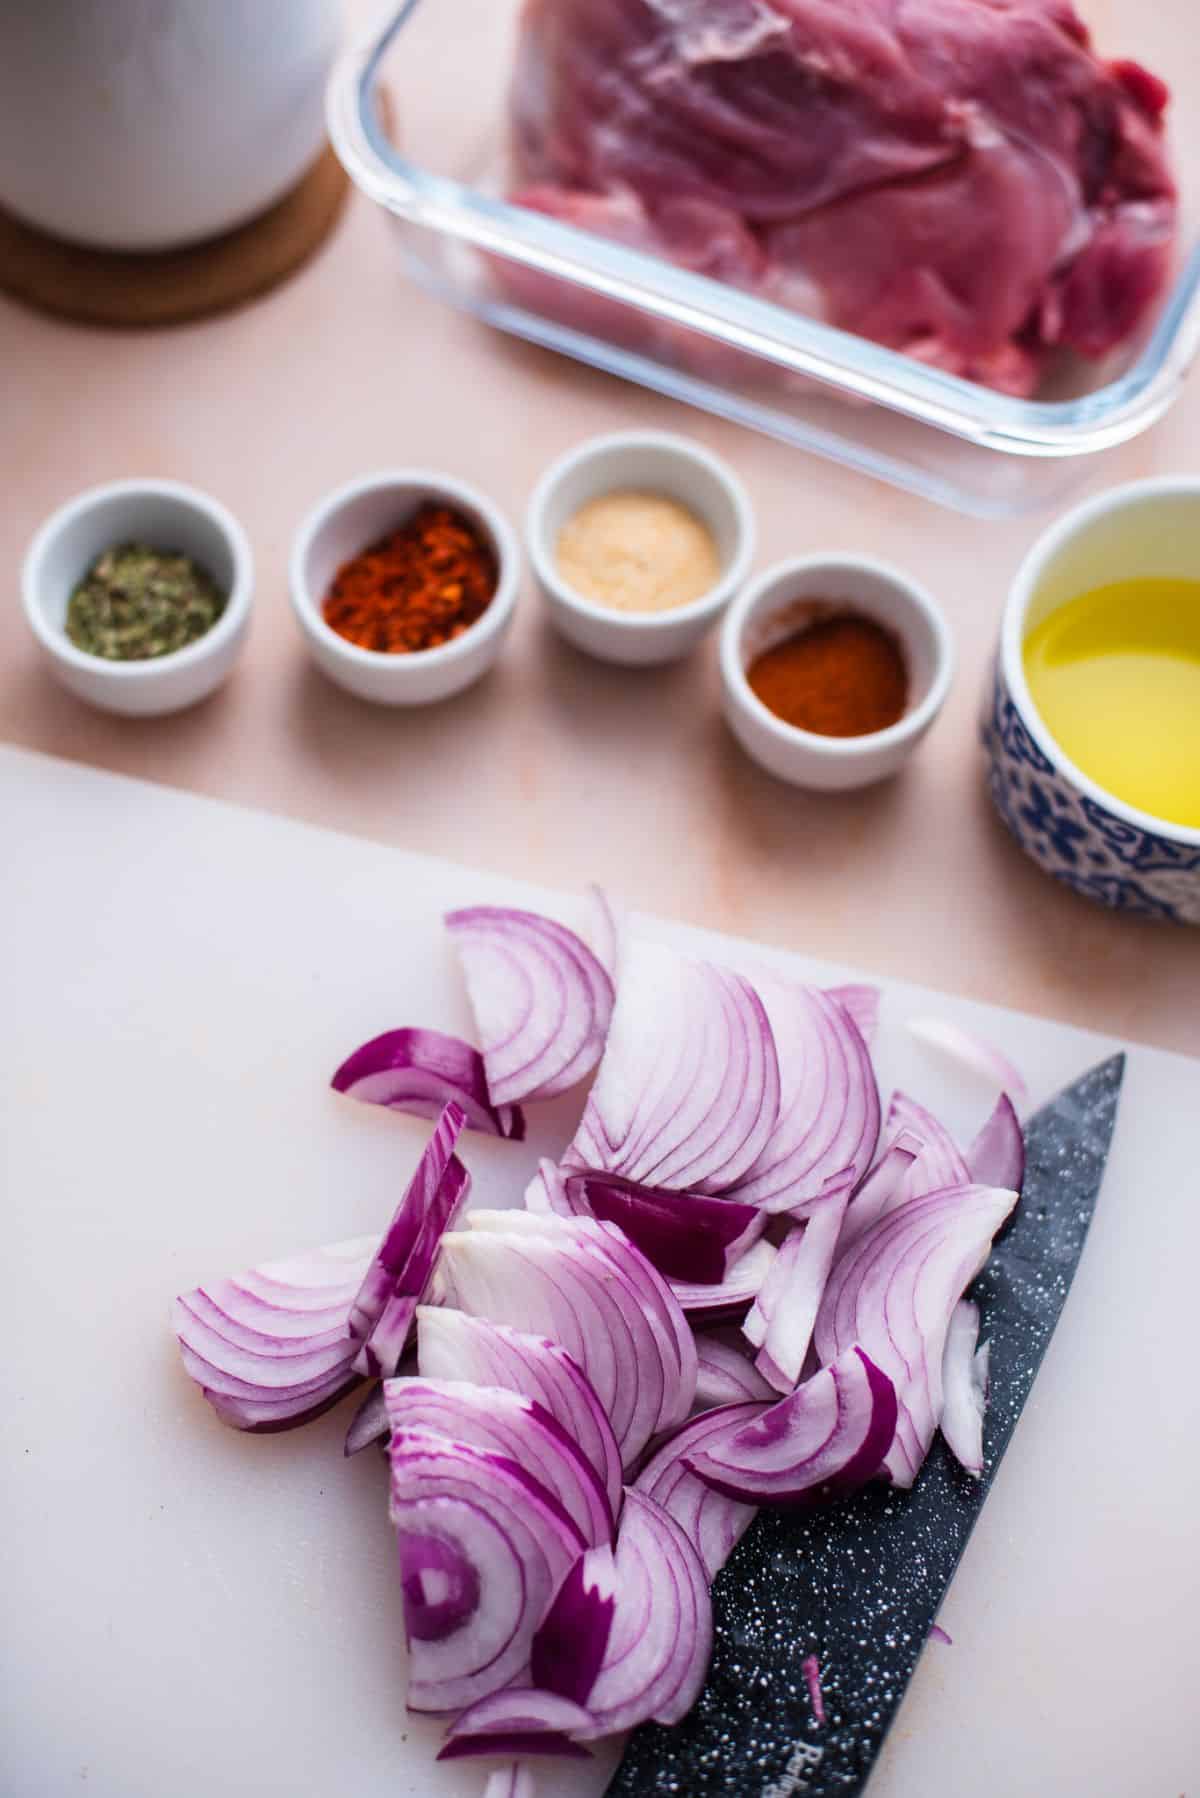 chopped red onion on cutting board and seasonings